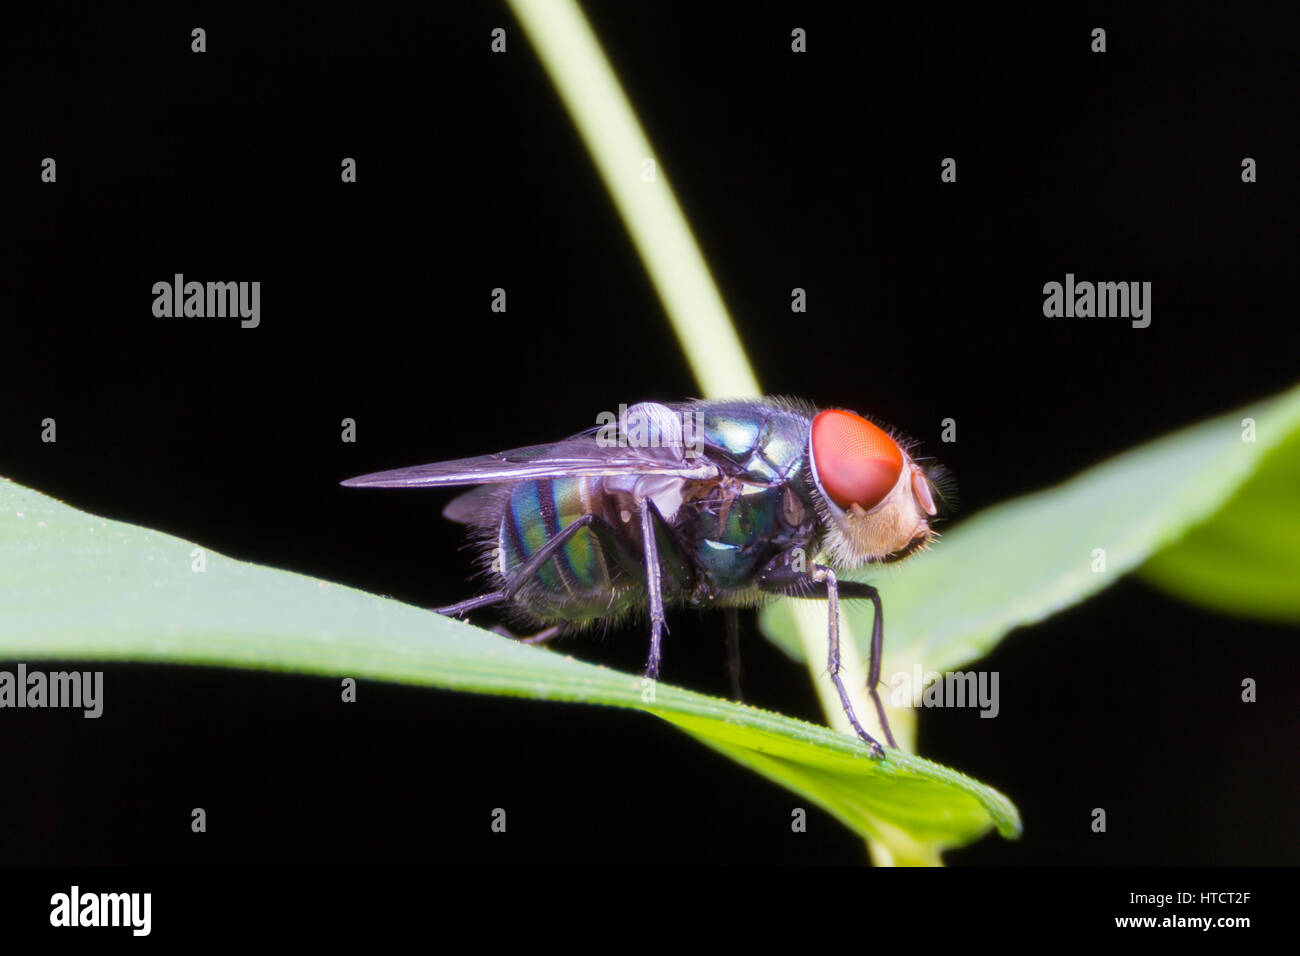 Blow fly, carrion fly, bluebottles or cluster fly Stock Photo